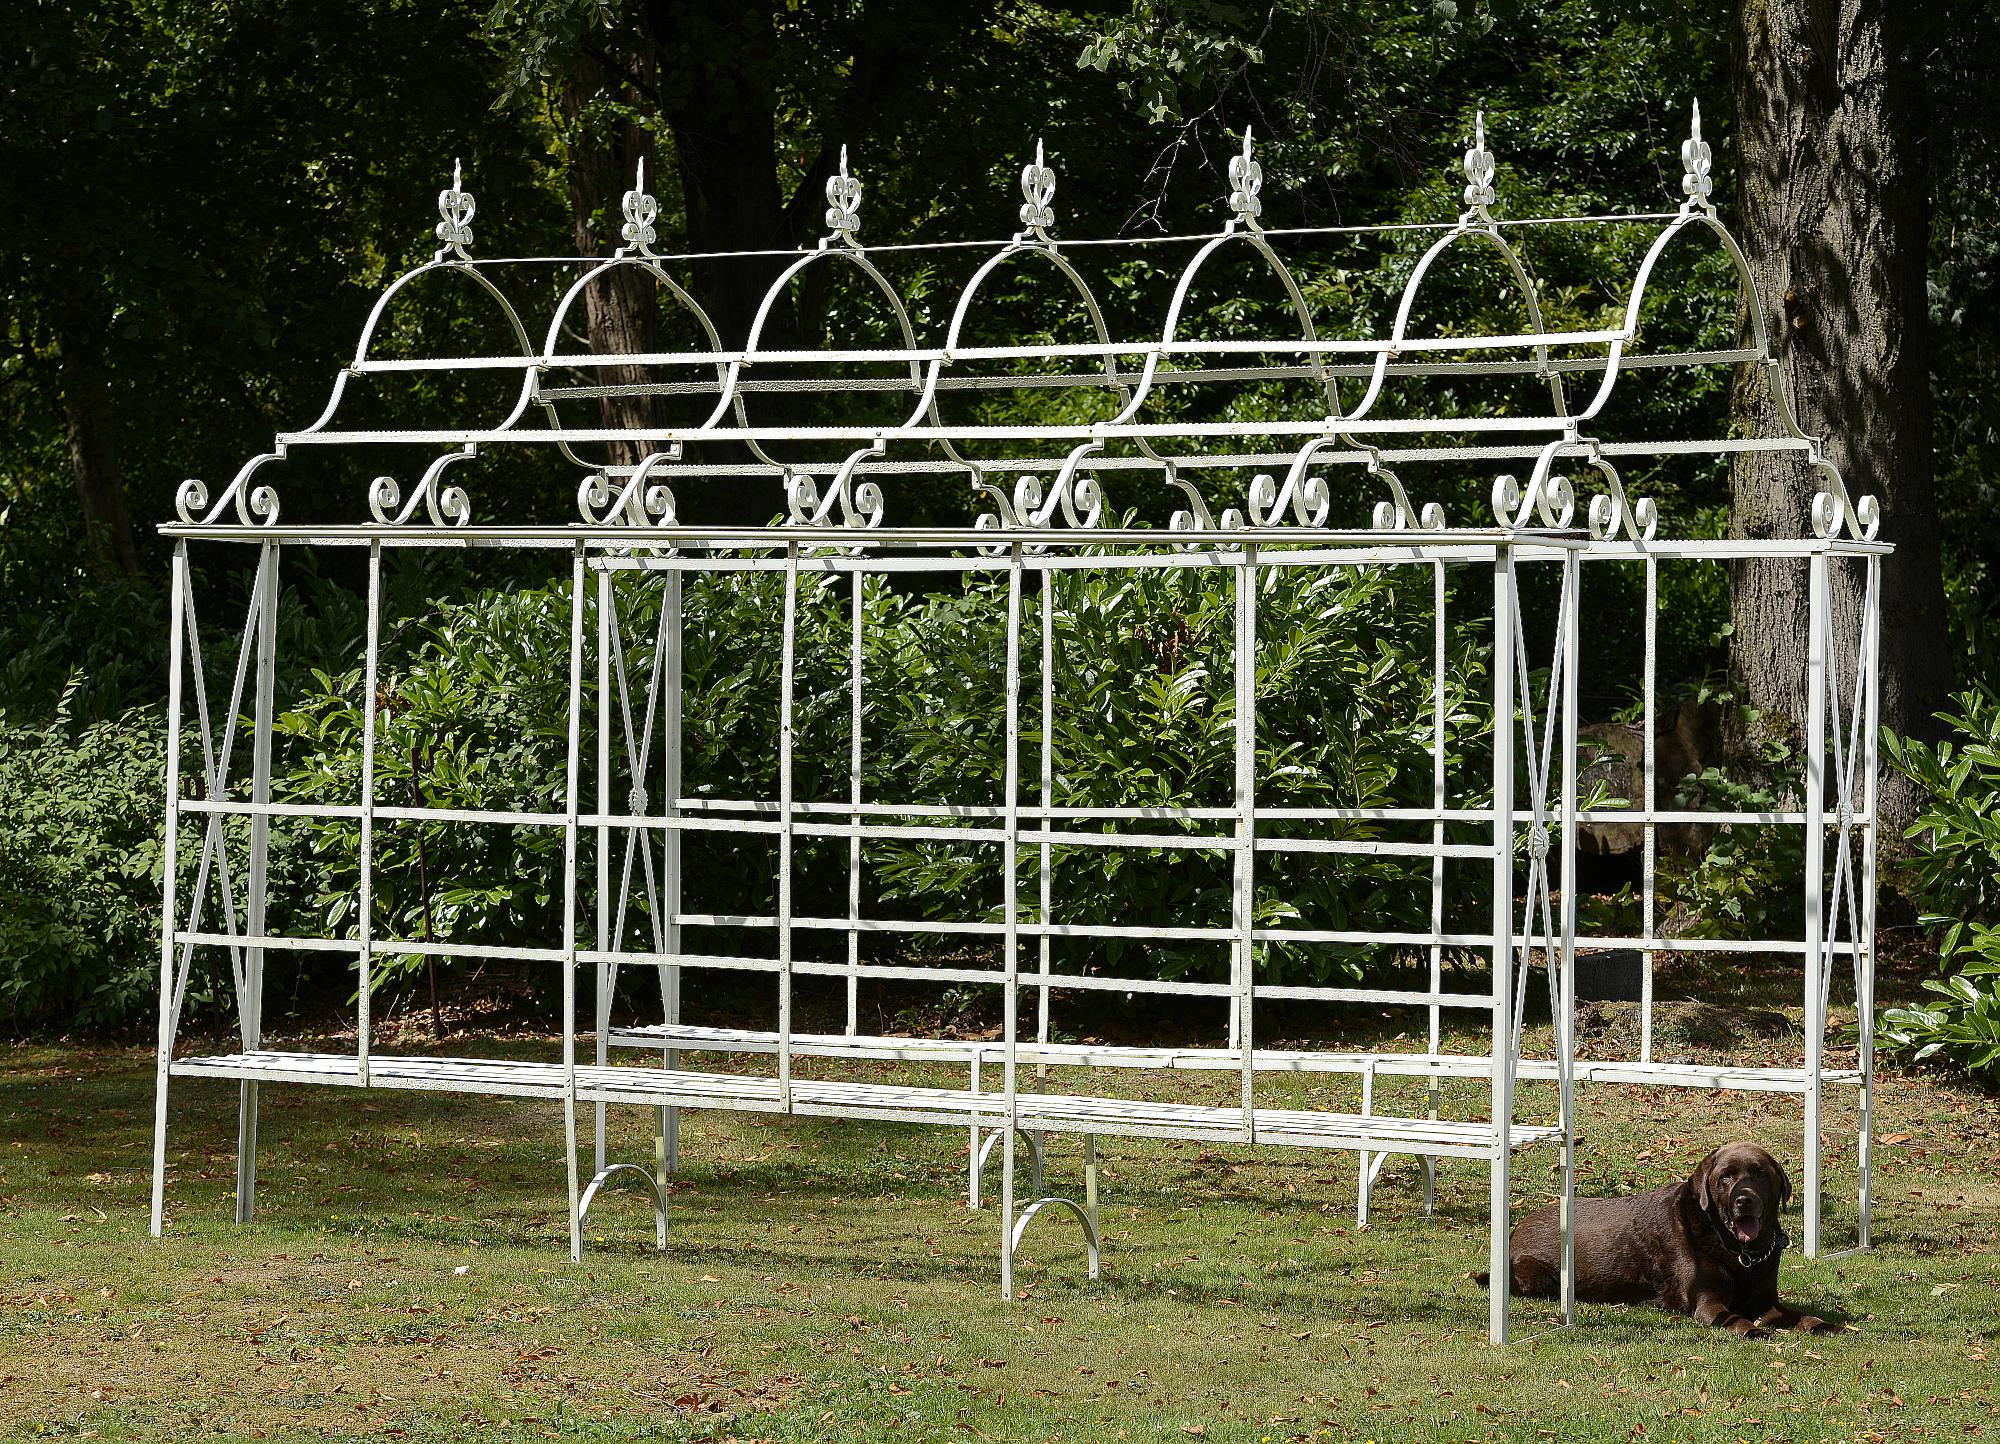 Garden Furniture: A wrought iron arbour enclosing seatsmid 20th century280cm high by 360cm long by